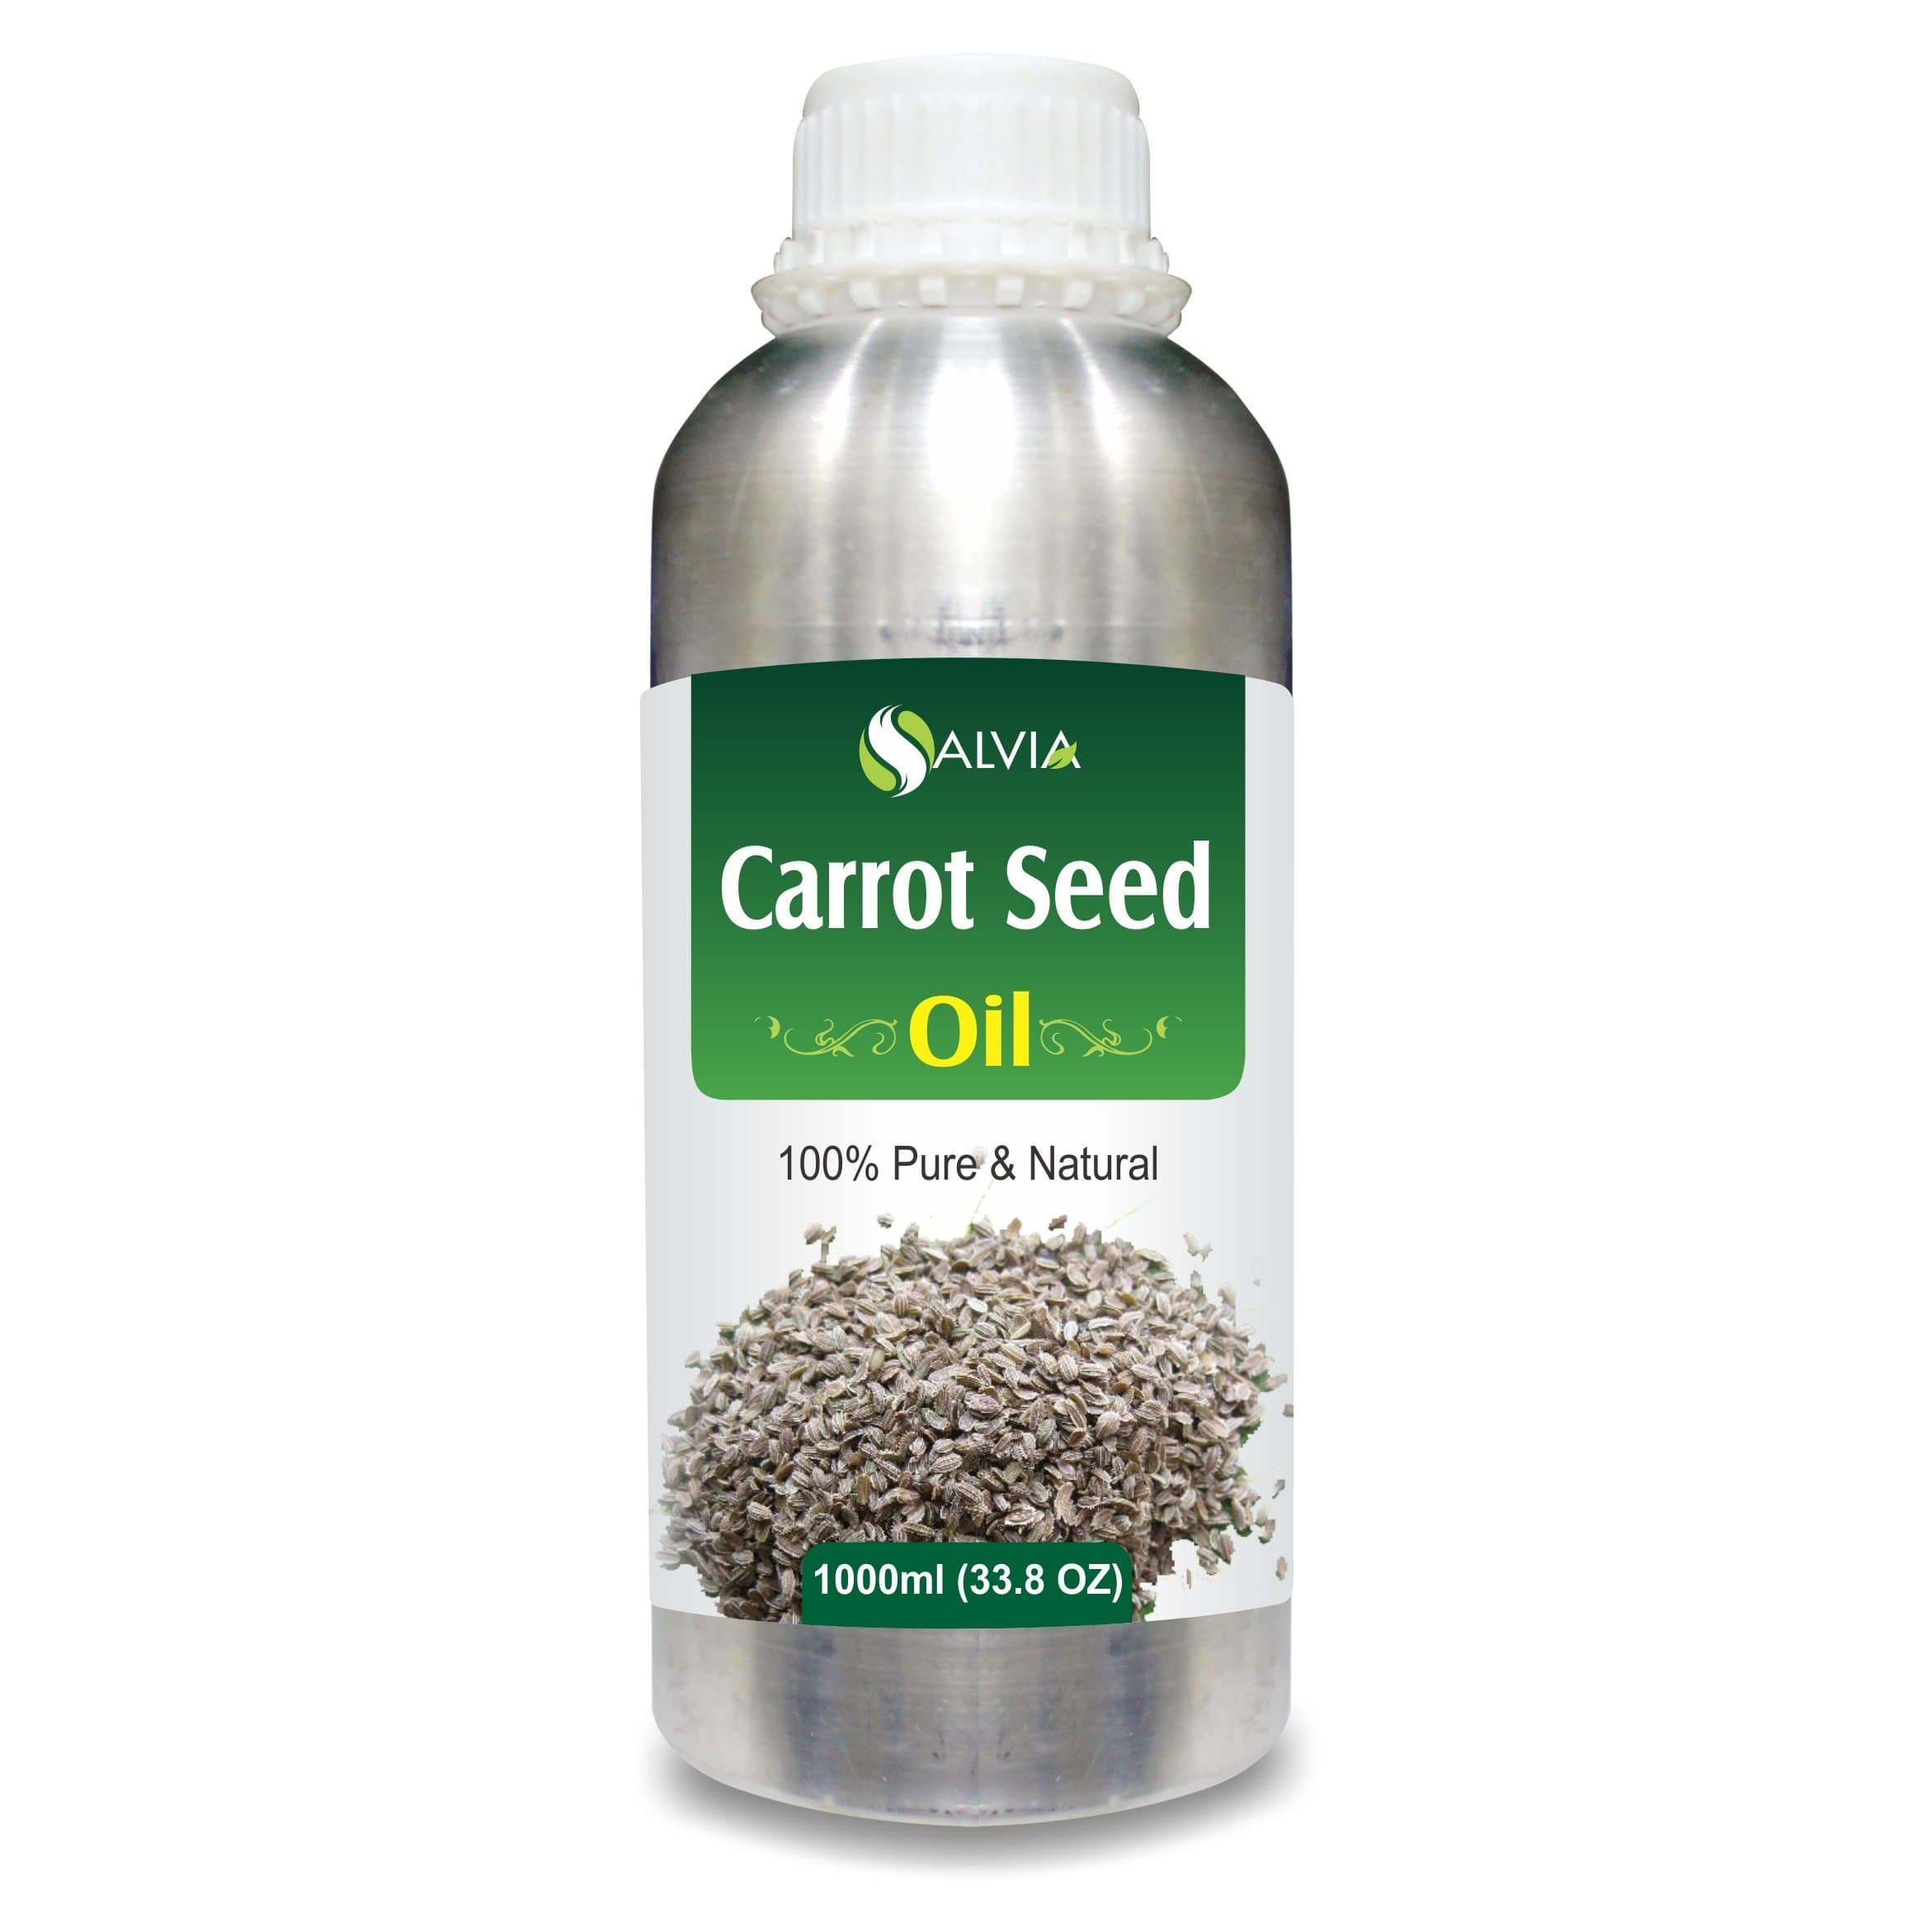 Carrot Seed Oil uses